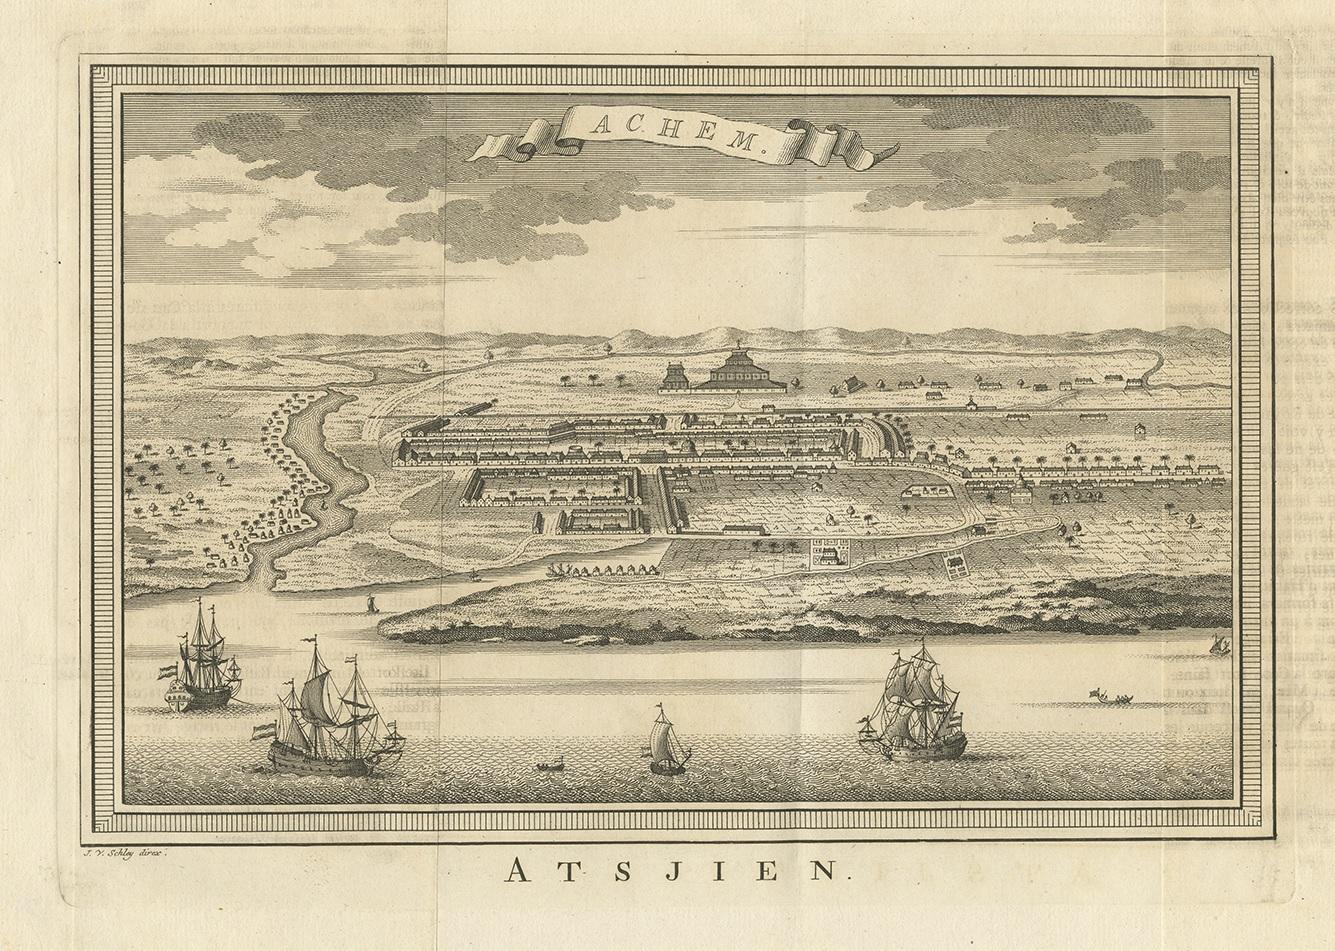 Antique print titled 'Achem - Atsjien'. Decorative panoramic view of Atjeh (Banda Aceh) on Sumatra, Indonesia. On this engraving a pagode like building is visible in the background. In the foreground sailing vessels. This print originates from